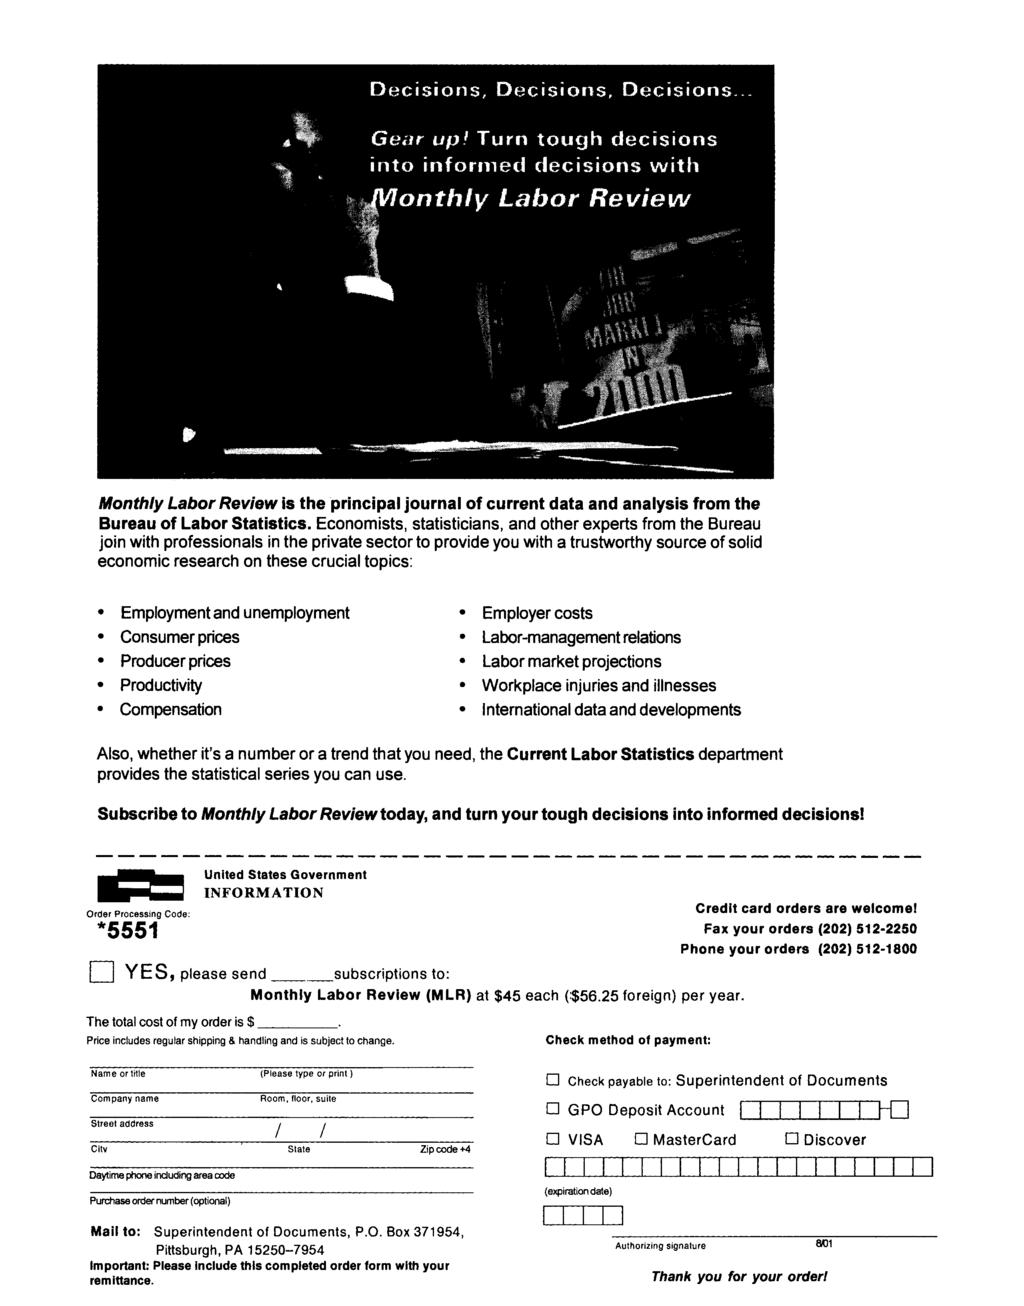 Monthly Labor Review is the principal journal of current data and analysis from the Bureau of Labor Statistics.